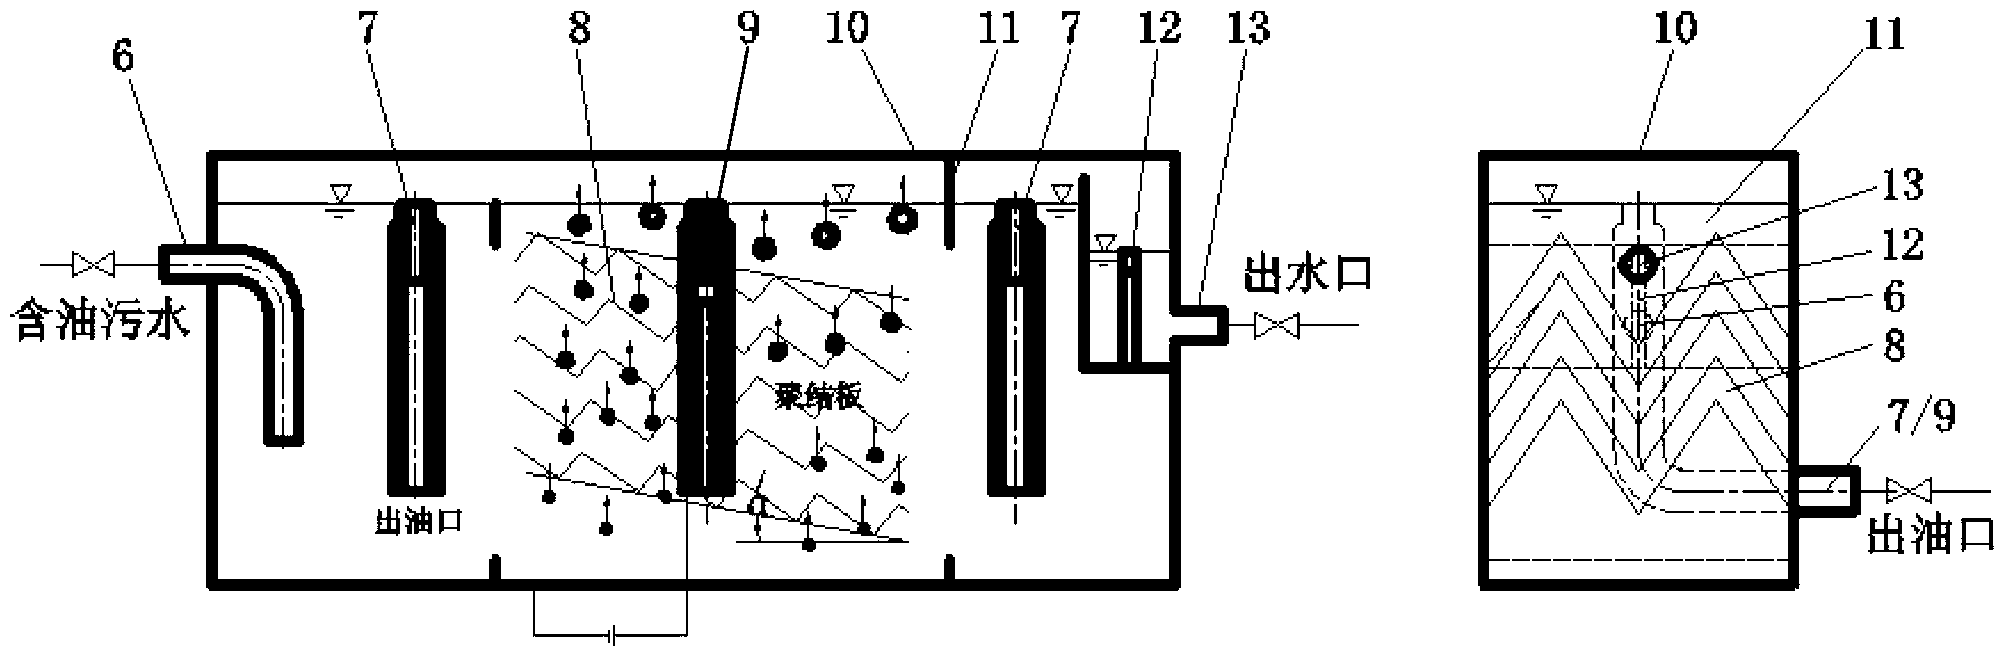 Physical demulsifying and coalescing and oil-water separating method for oil-water emulsion under micro-electric field effect